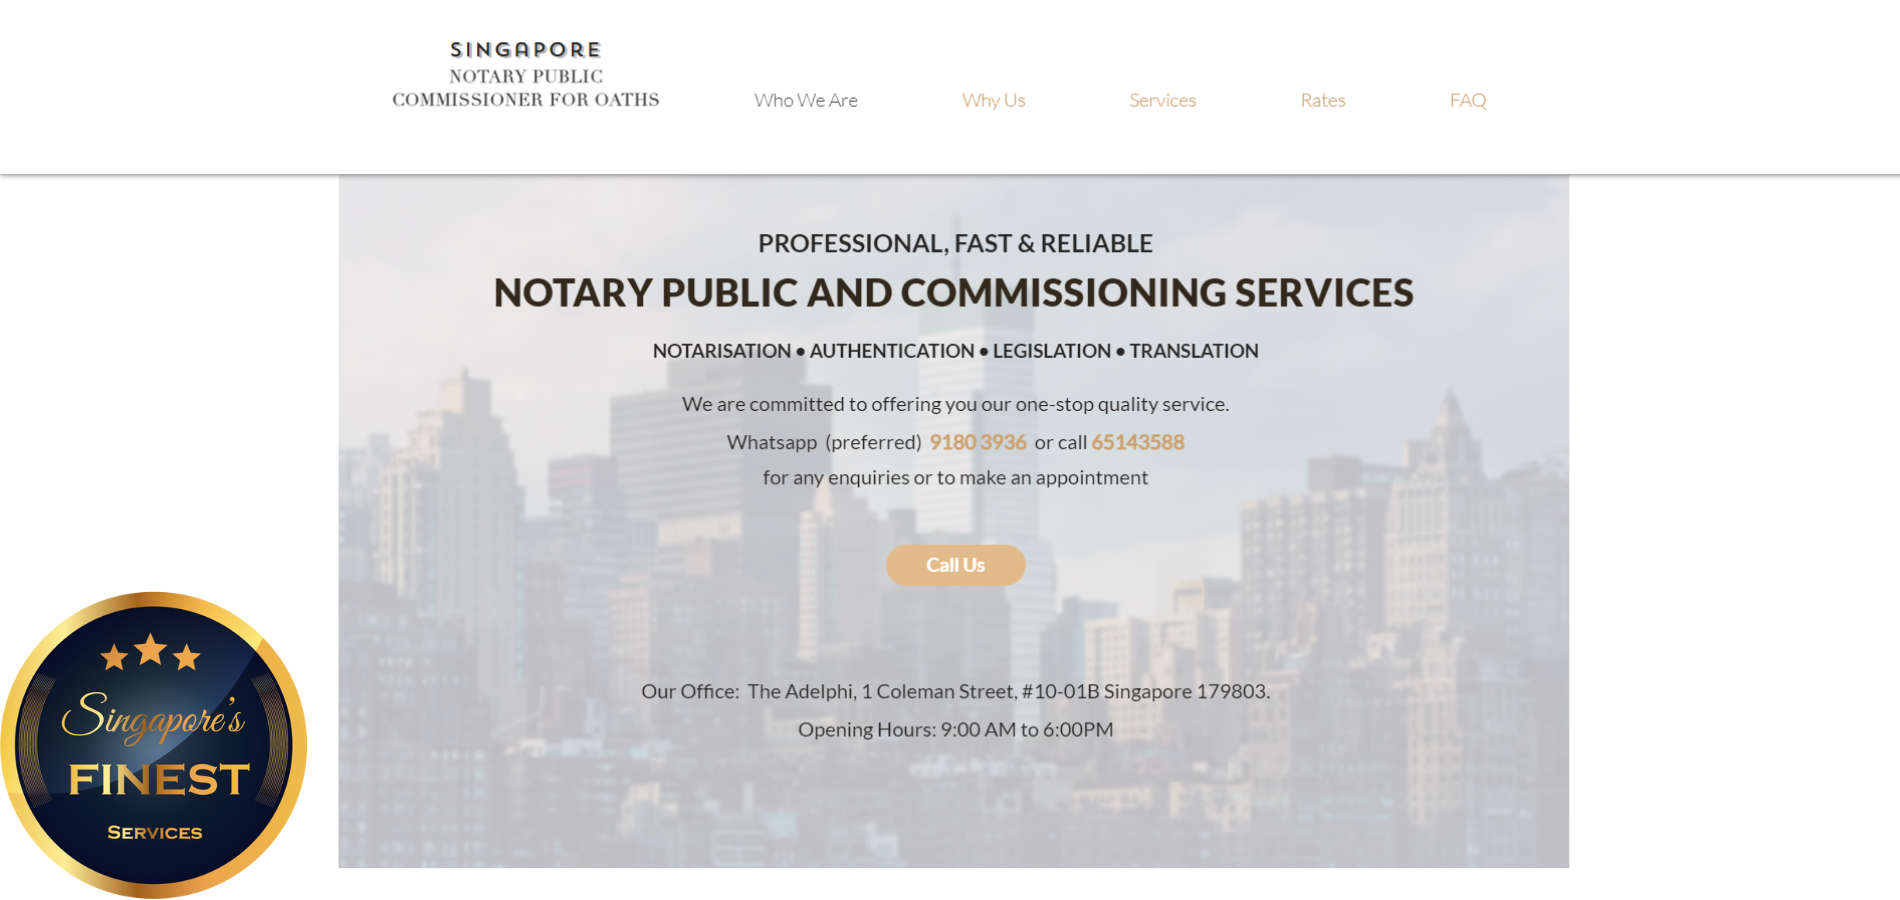 The Finest Notary Public in Singapore